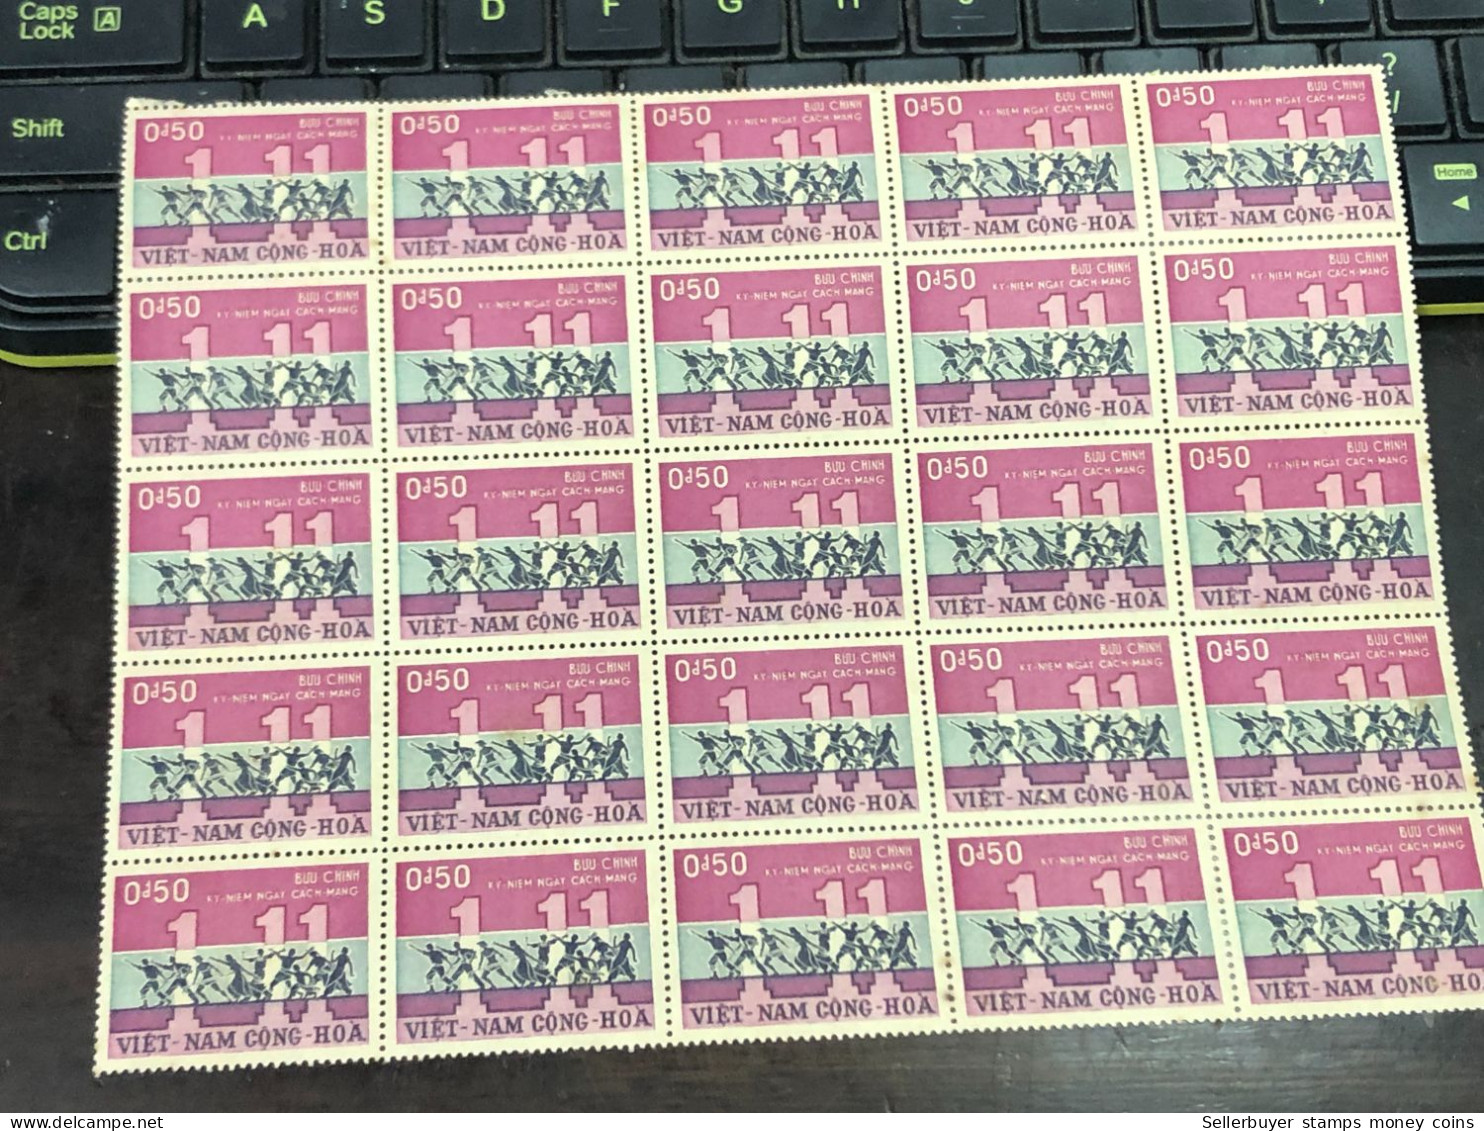 Vietnam South Sheet Stamps Before 1975(0$50 Revolution Cach Mang1964) 1 Pcs 25 Stamps Quality Good - Vietnam